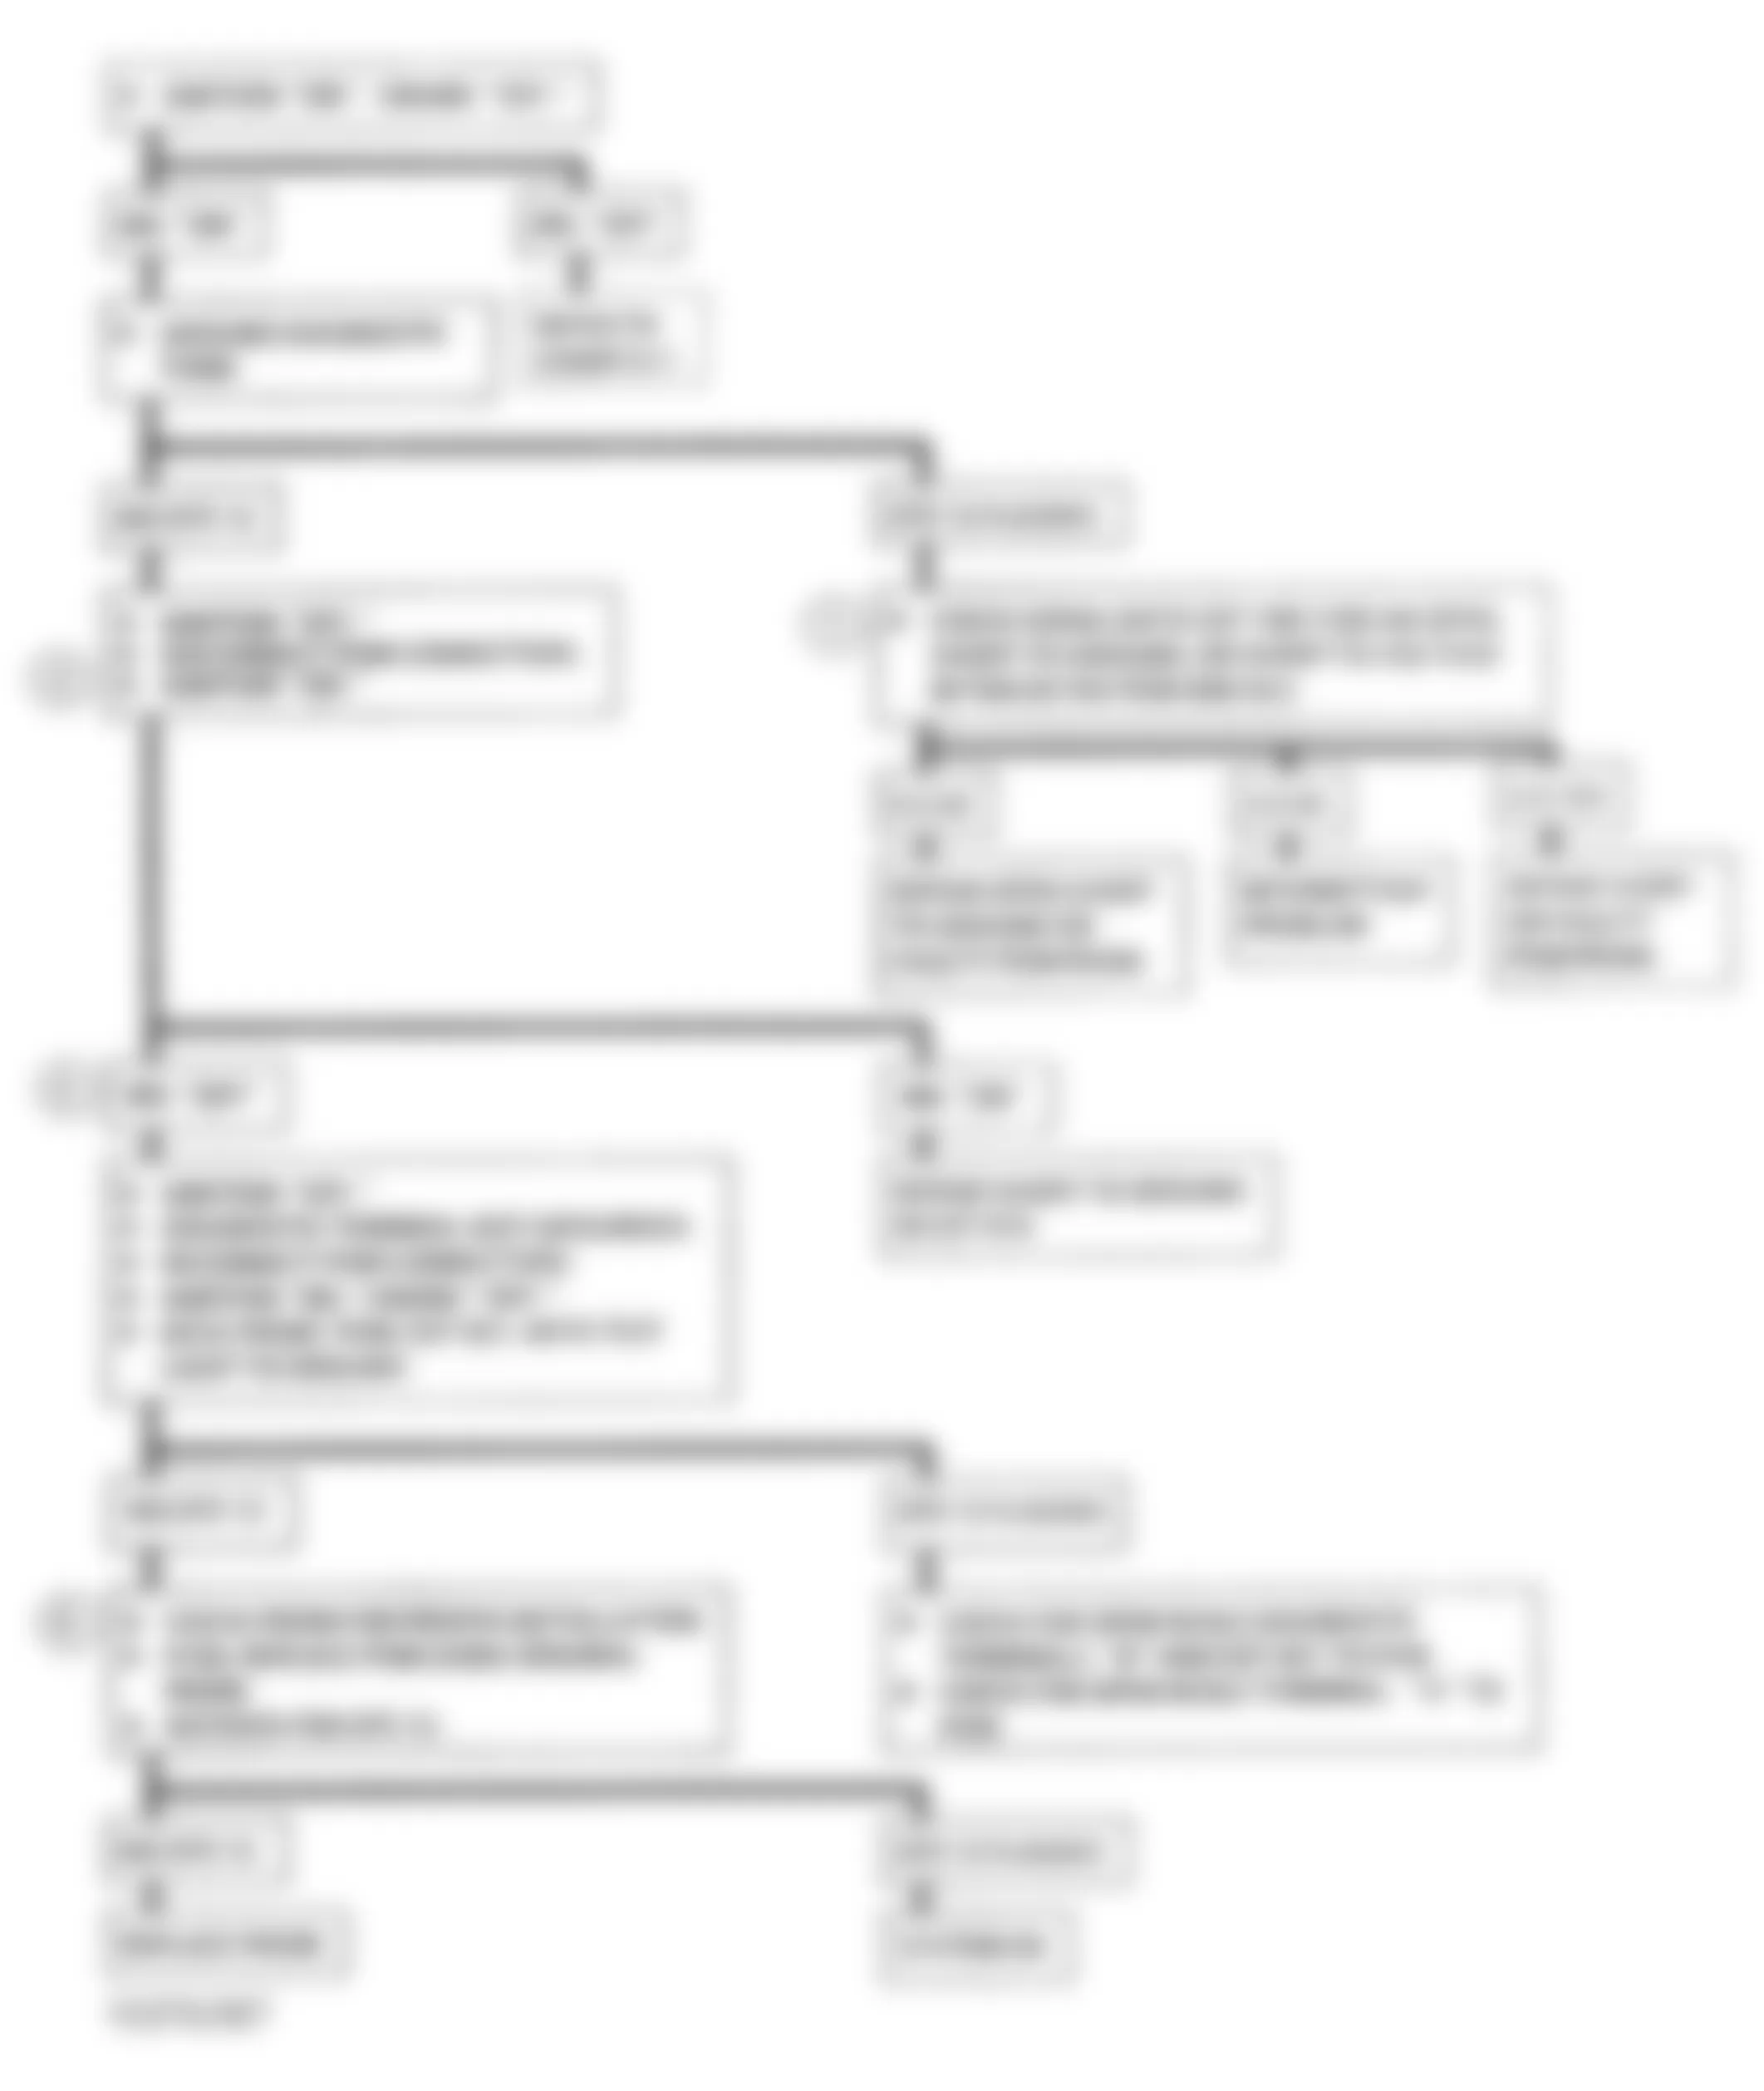 Chevrolet Pickup C2500 1993 - Component Locations -  A-2, Flowchart, No DLC Data, MIL On All Time - A/T